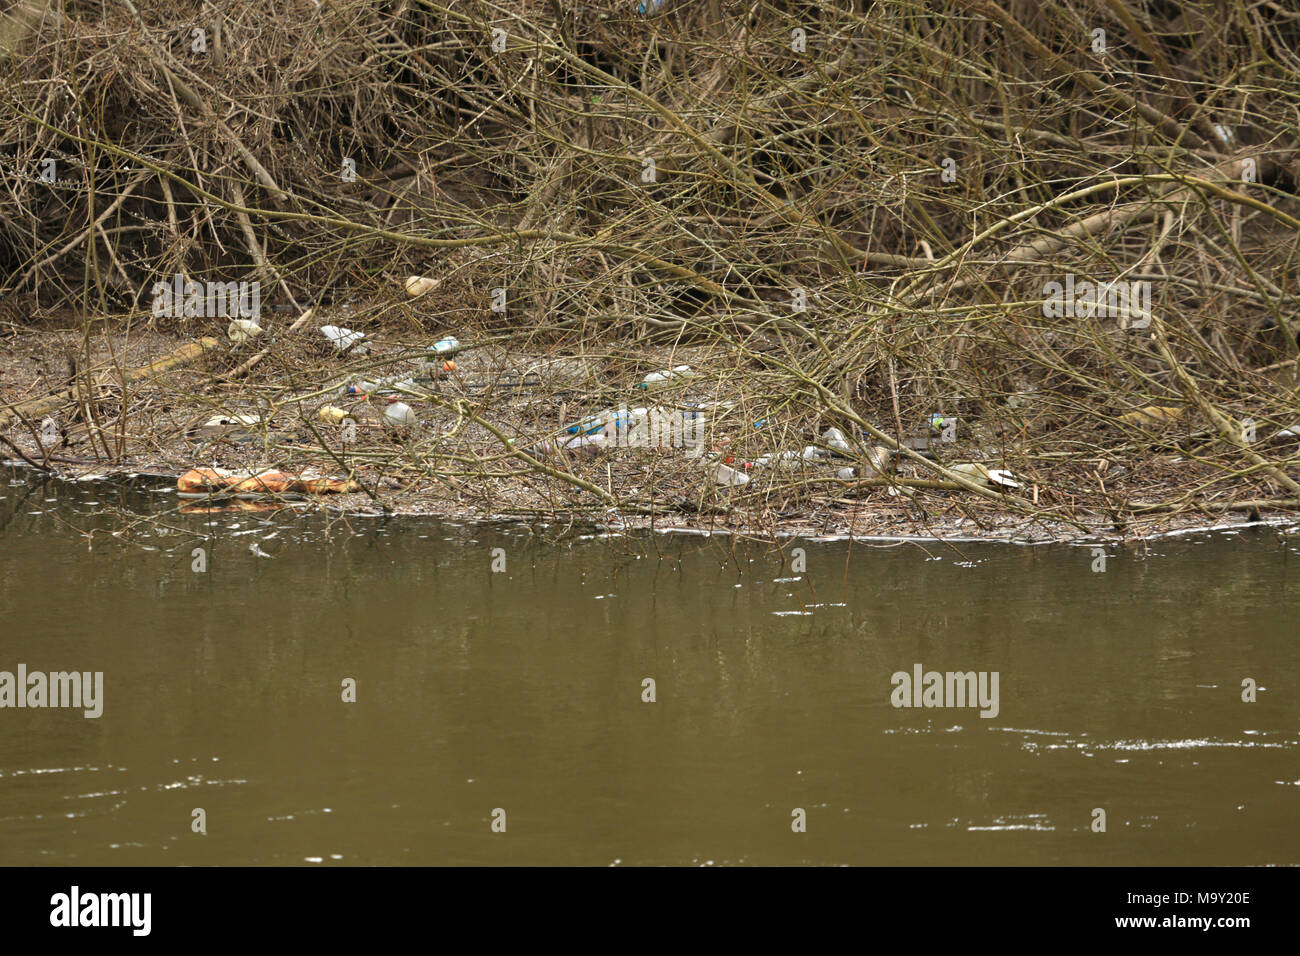 Plastic and other waste on the banks of the river Severn near Bewdley, Worcestershire, uk. Stock Photo